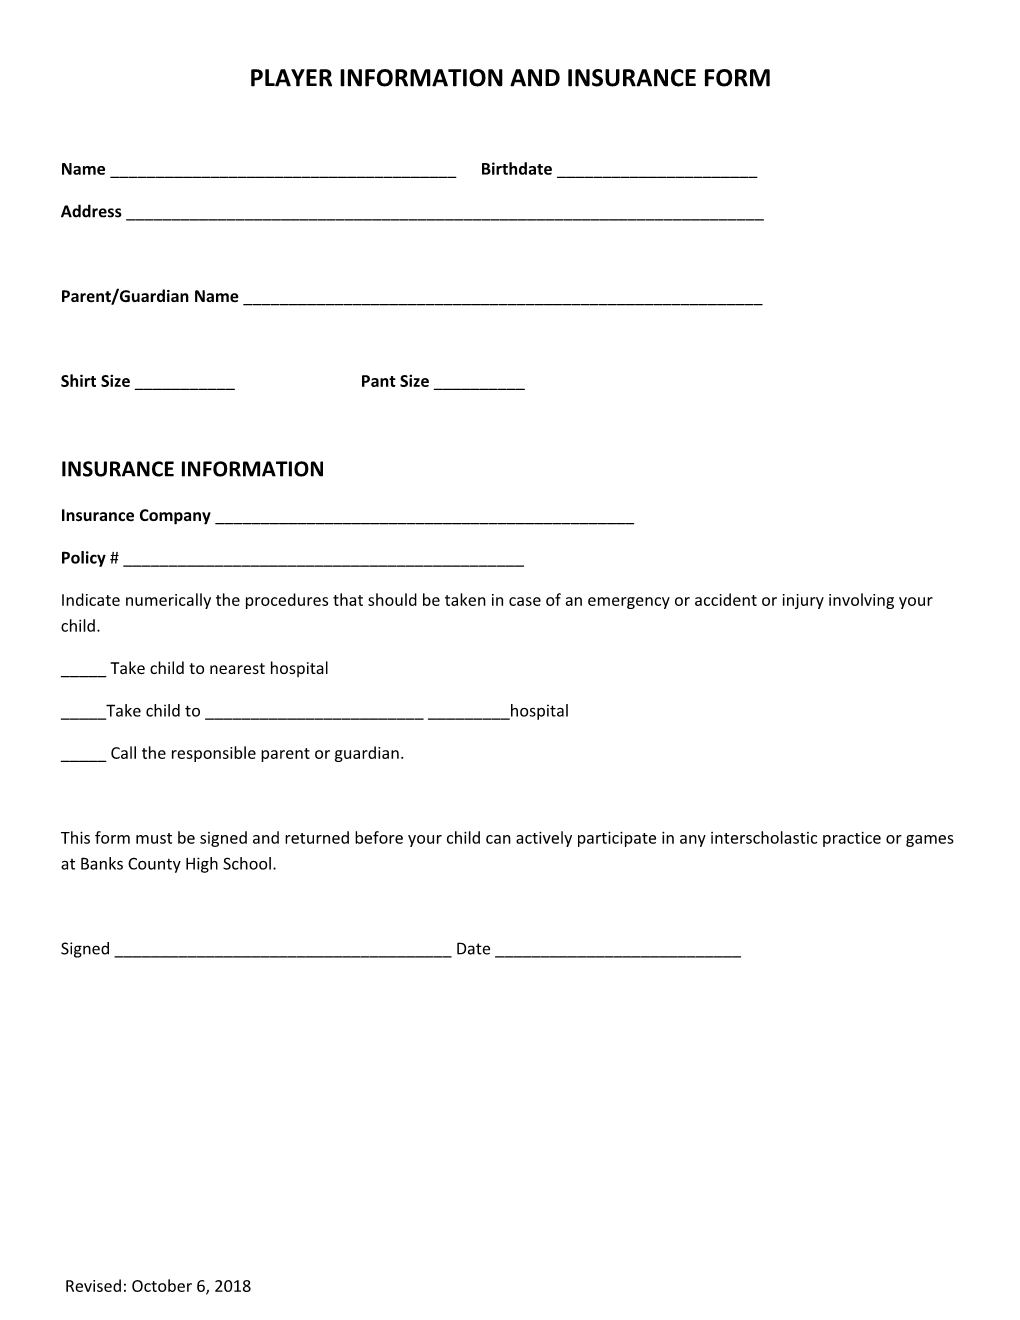 Player Information and Insurance Form